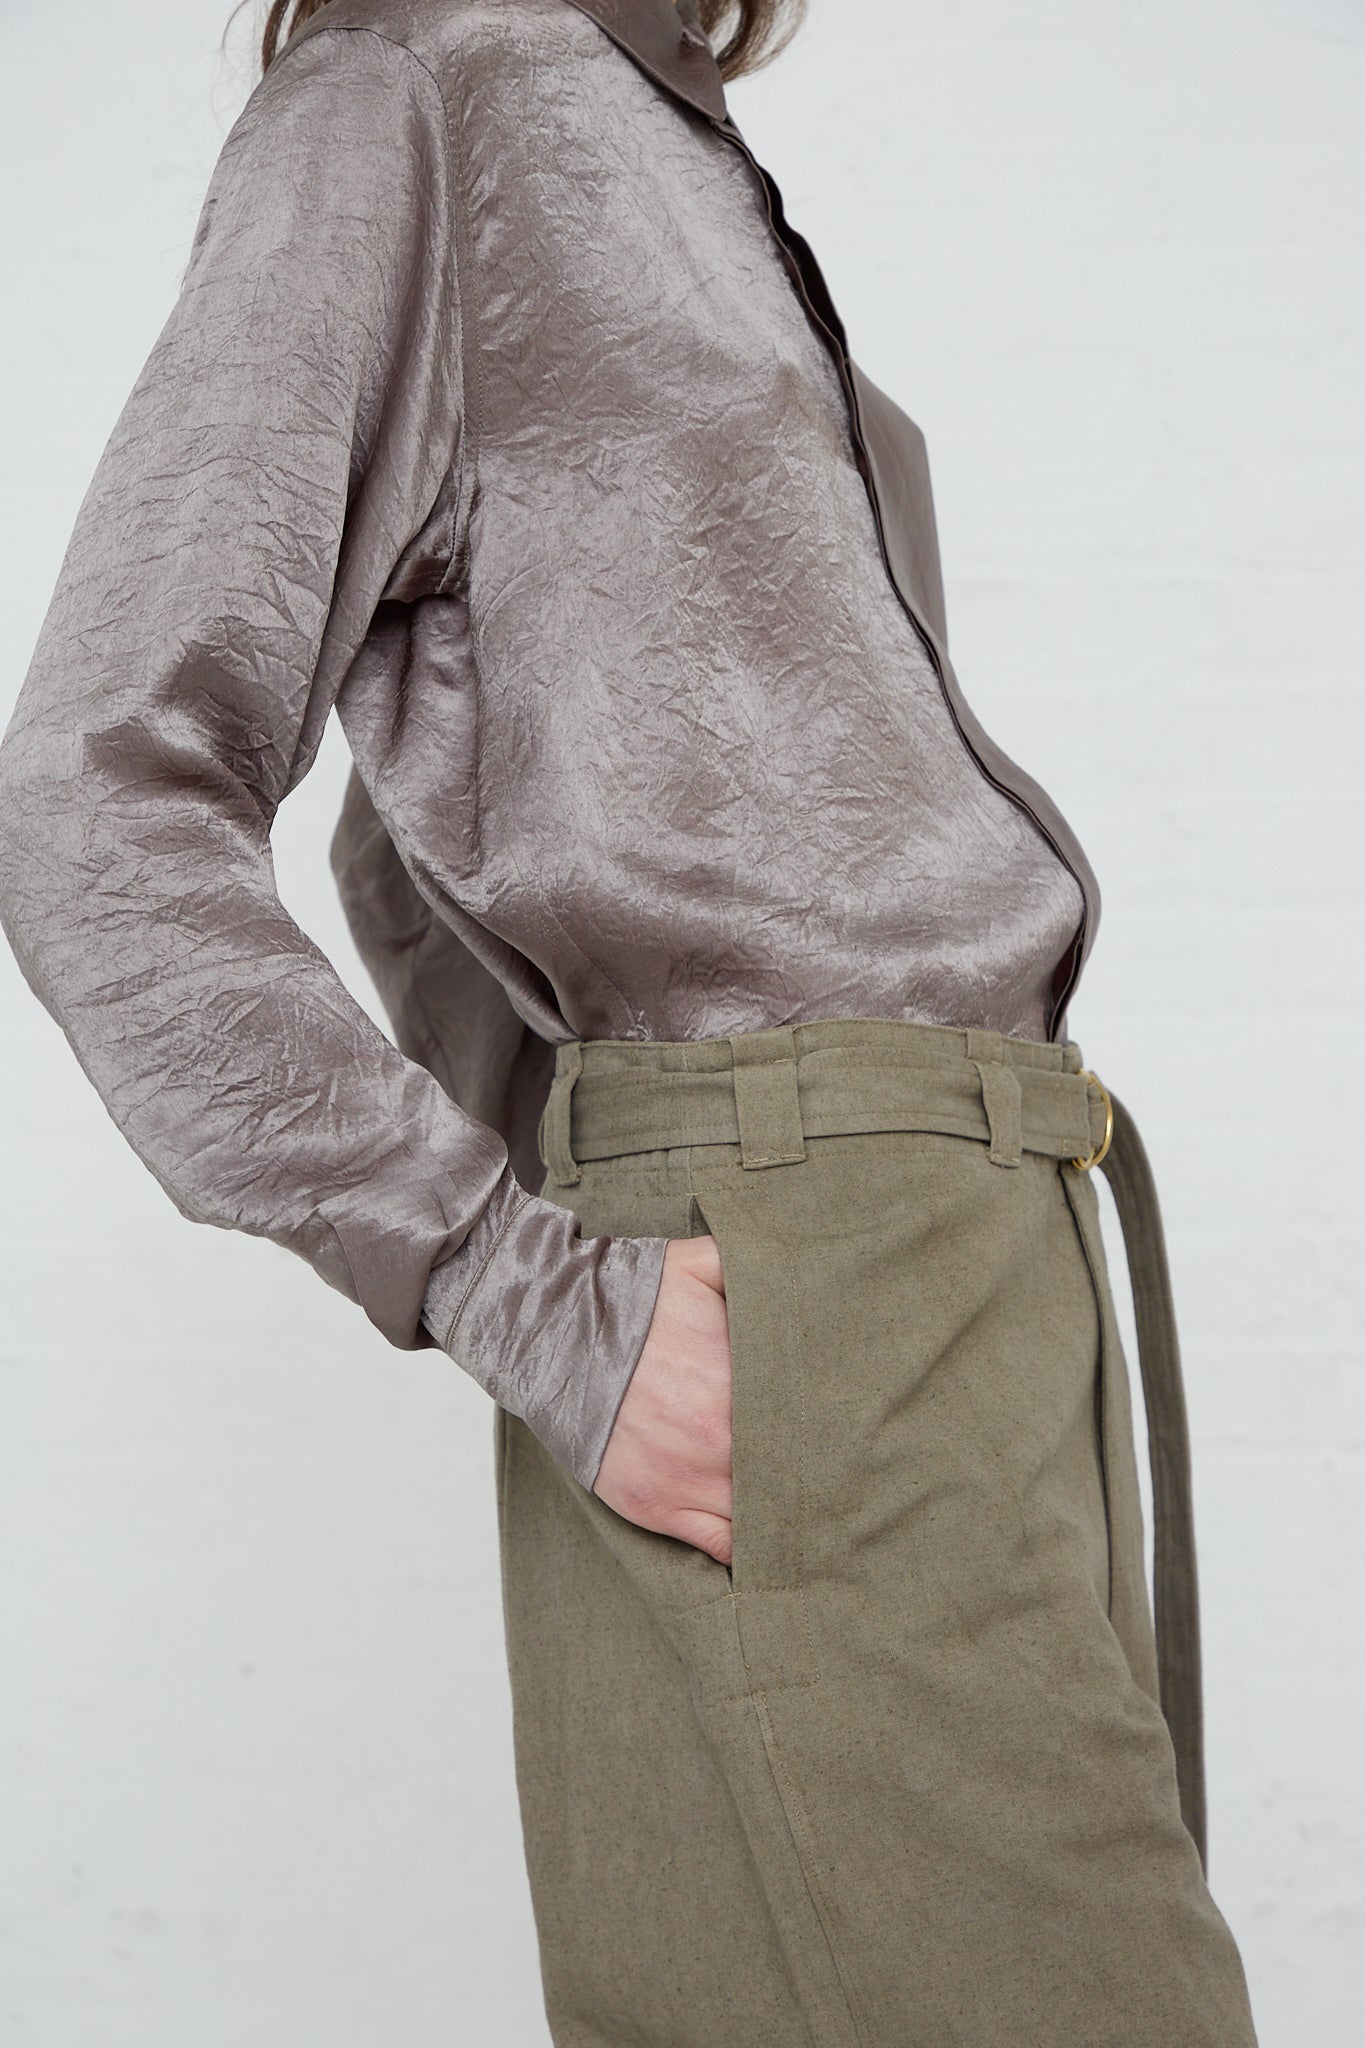 A woman wearing a grey shirt and olive pants made of the Belted Trouser in Fatigue by Lauren Manoogian, a cotton linen blend.